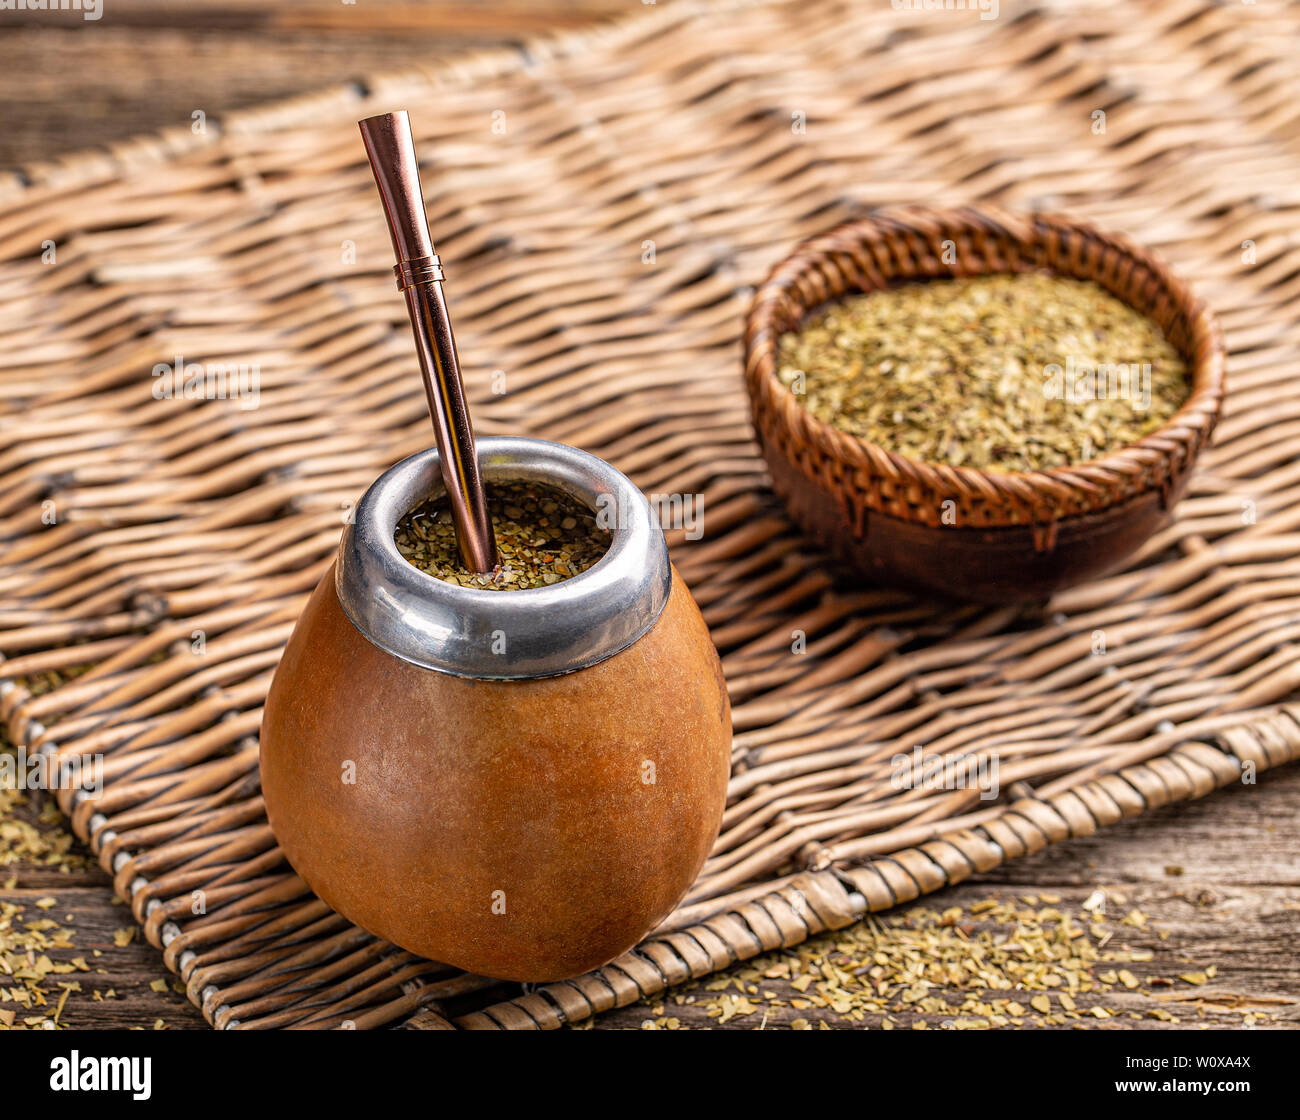 Argentinian Mate Gourd with a Metal Straw (bombilla in Spanish